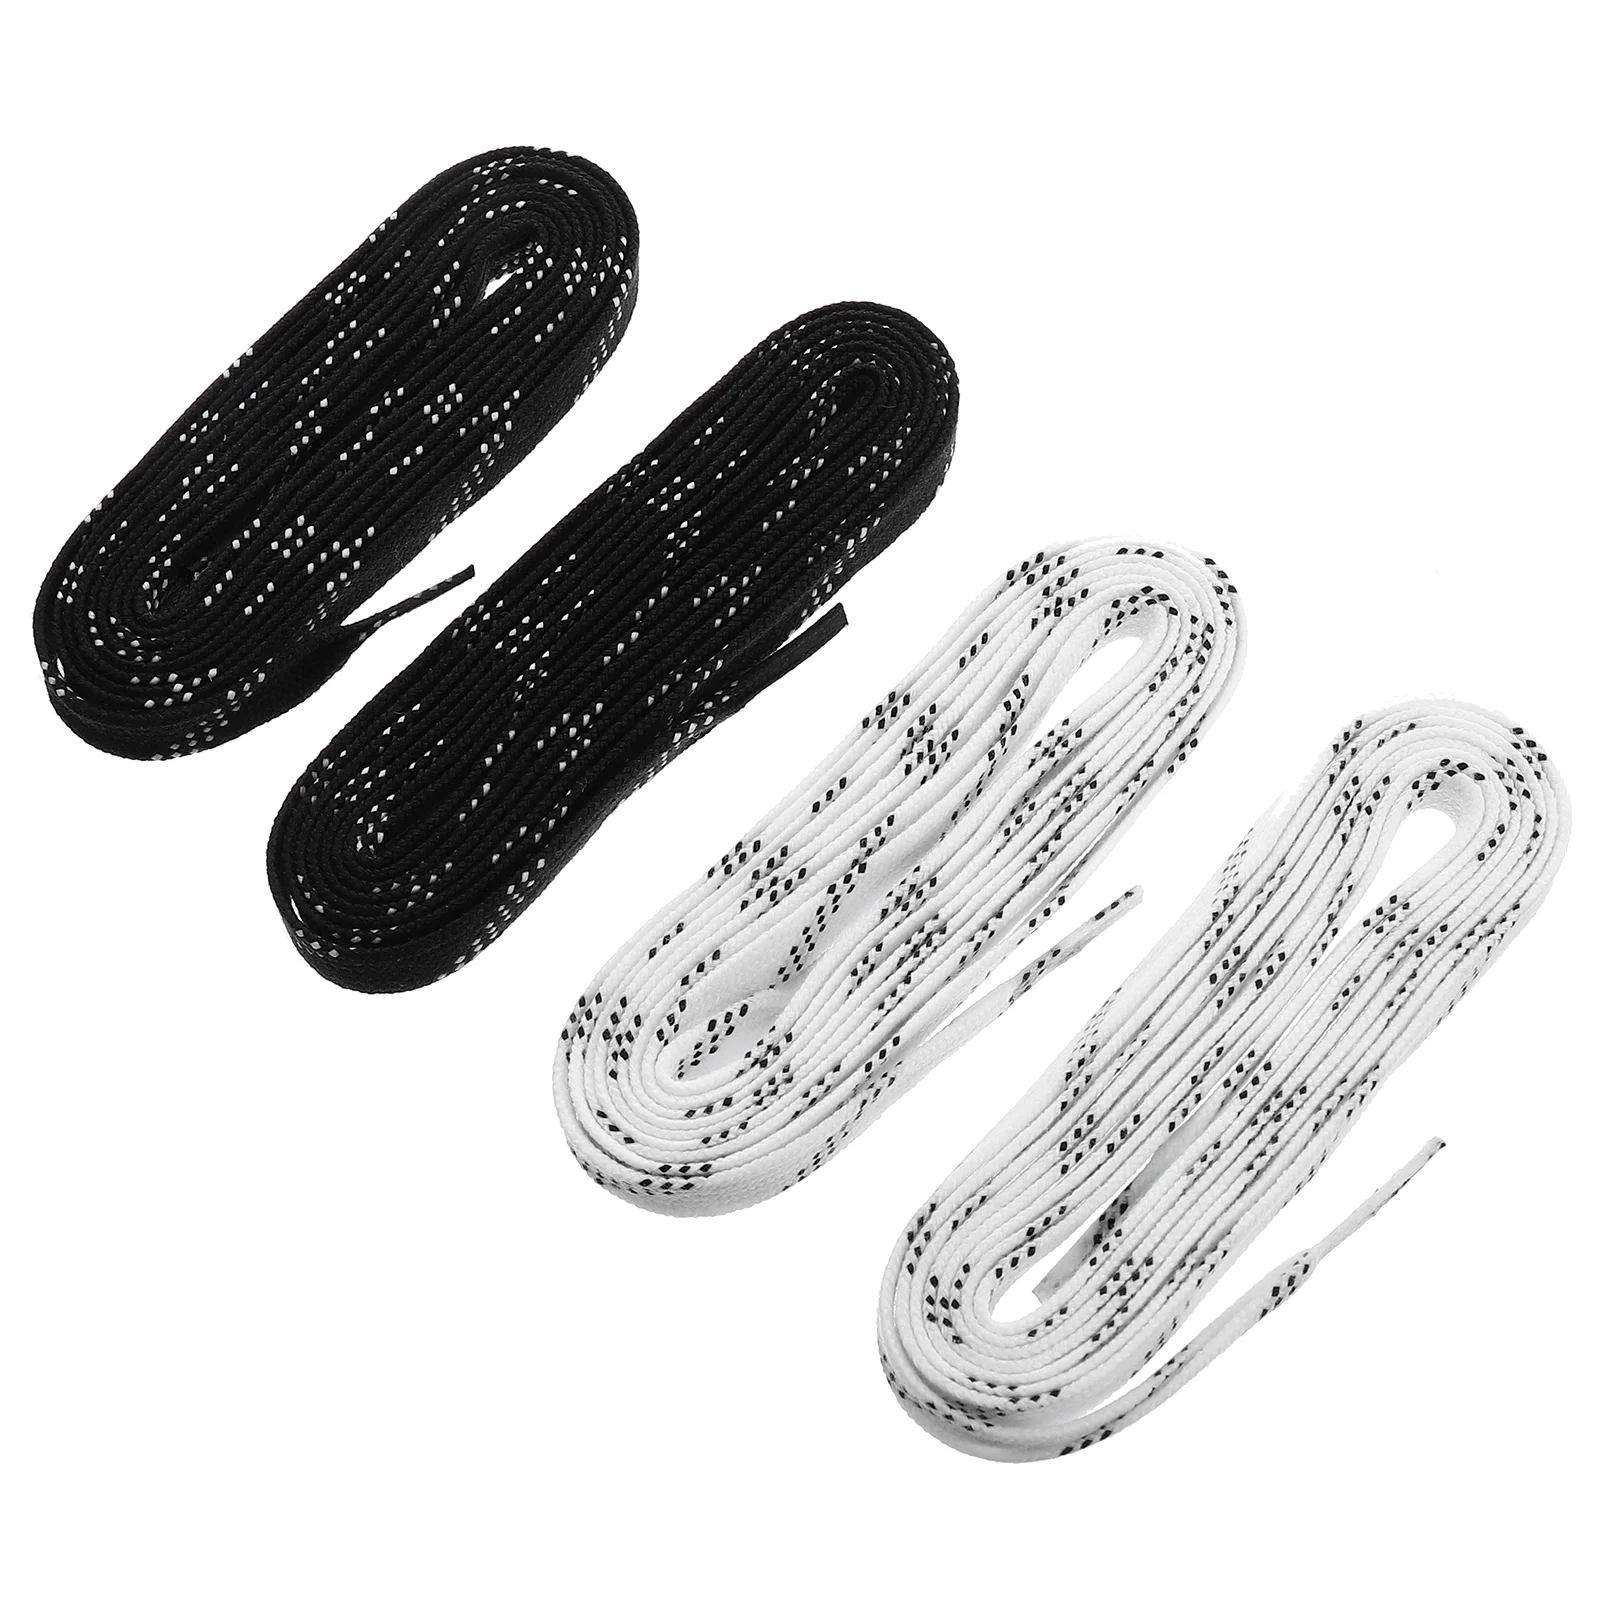 

2 Pairs Stretchy Laces Sneakers Shoelace Tie Shoes Accessories Shoelaces Puck Solid Color Flat Shoestrings Travel